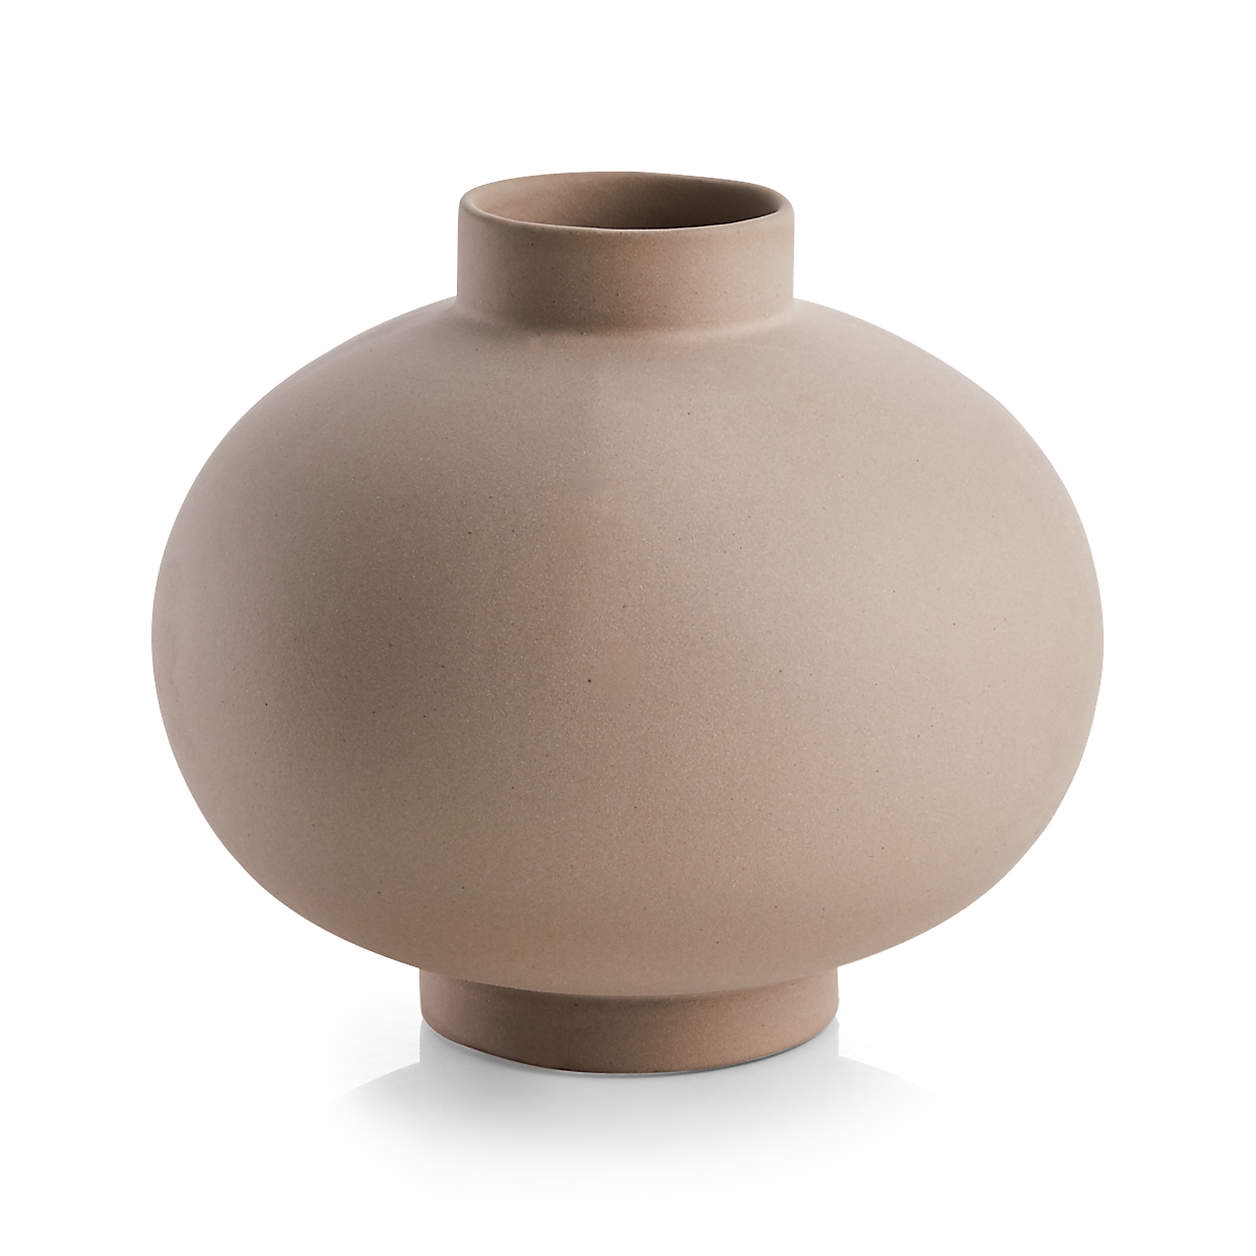 Full Moon Clay Vase by Leanne Ford - Image 0